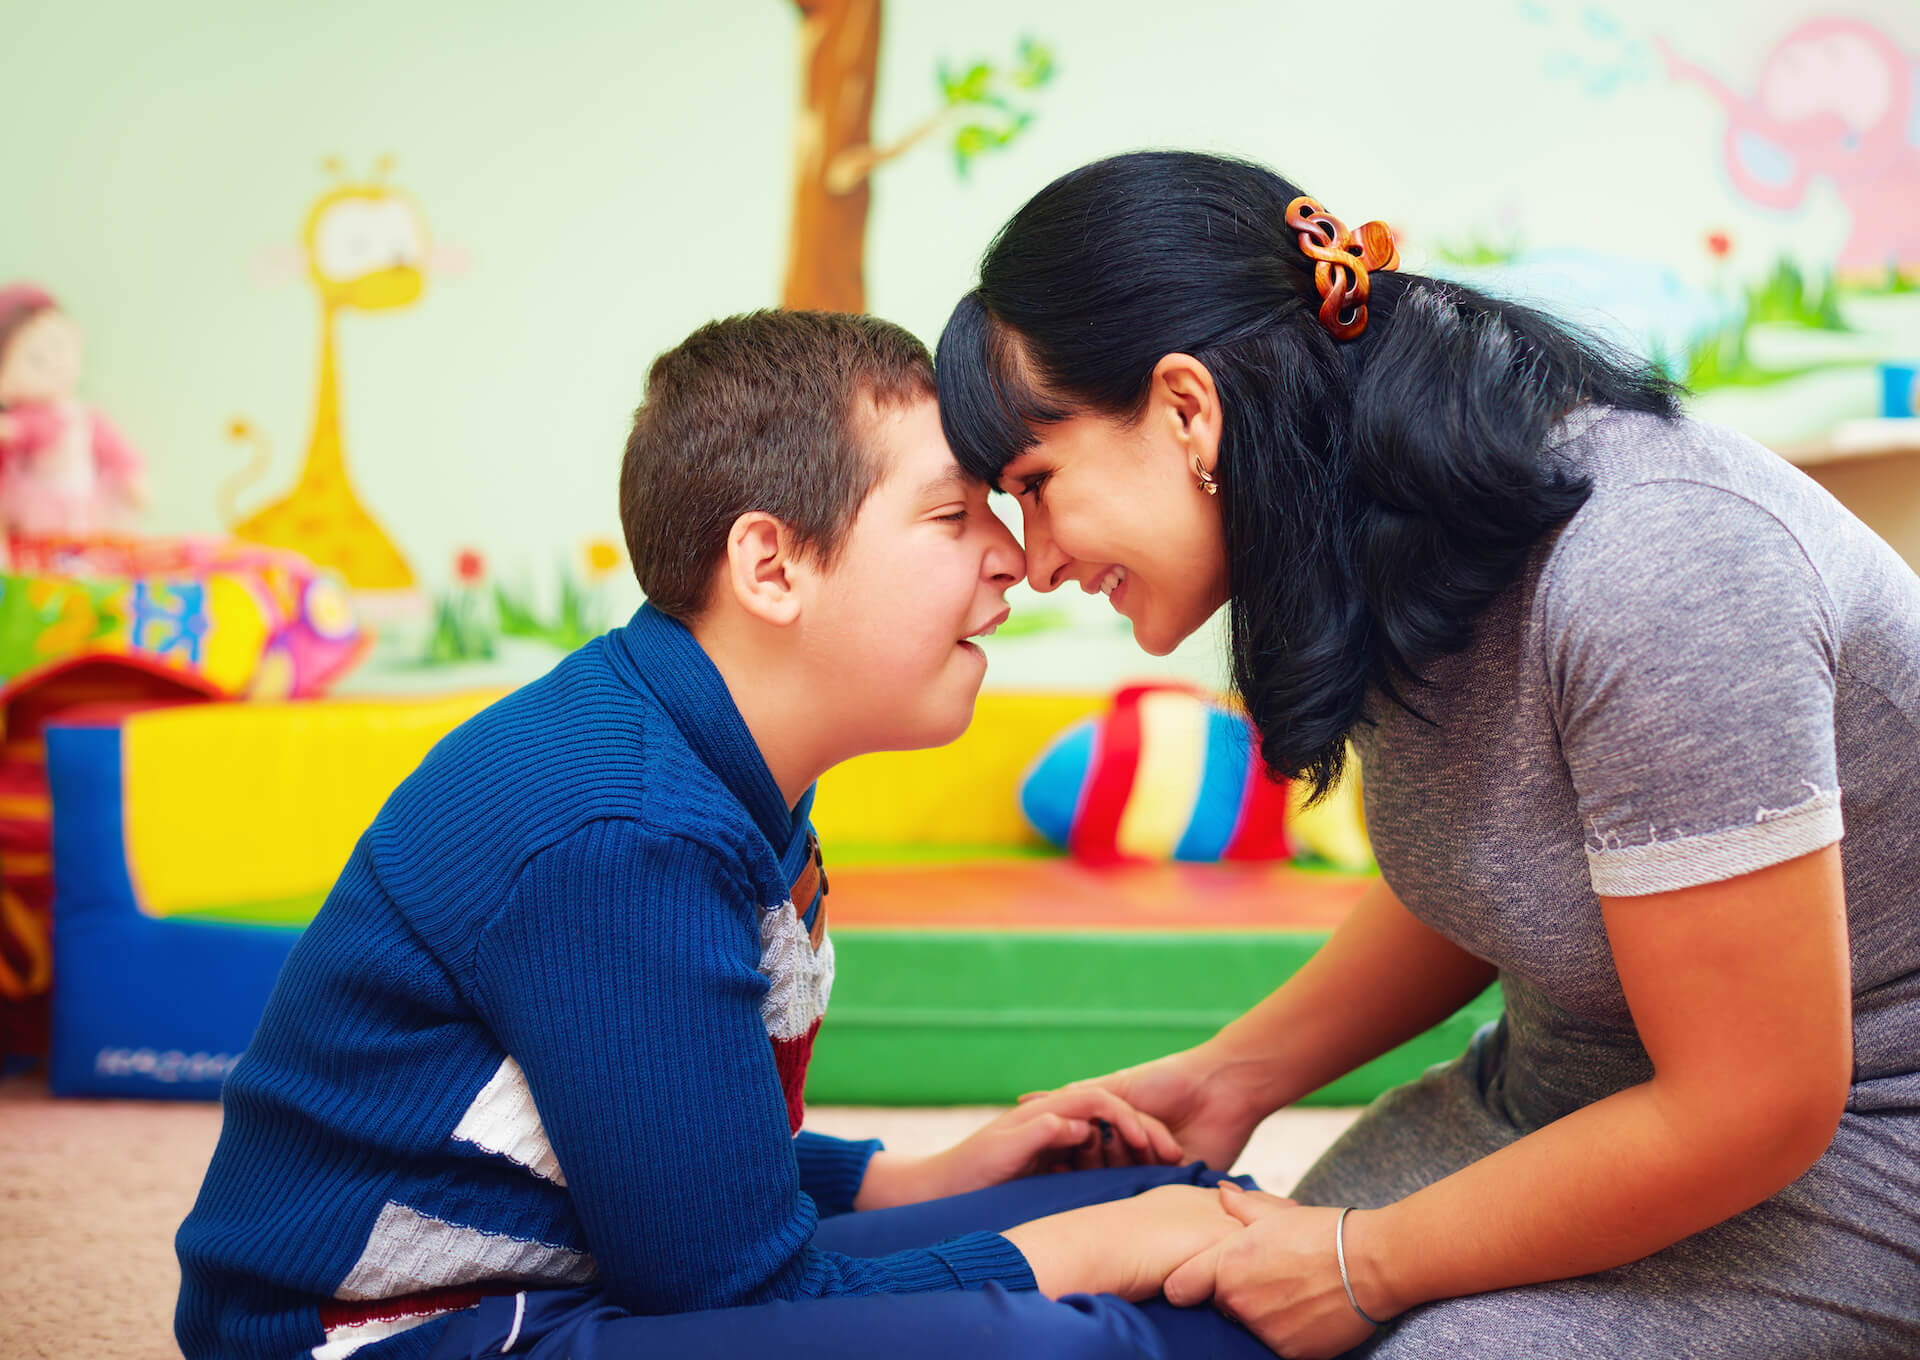 image of a cerebral palsy care worker